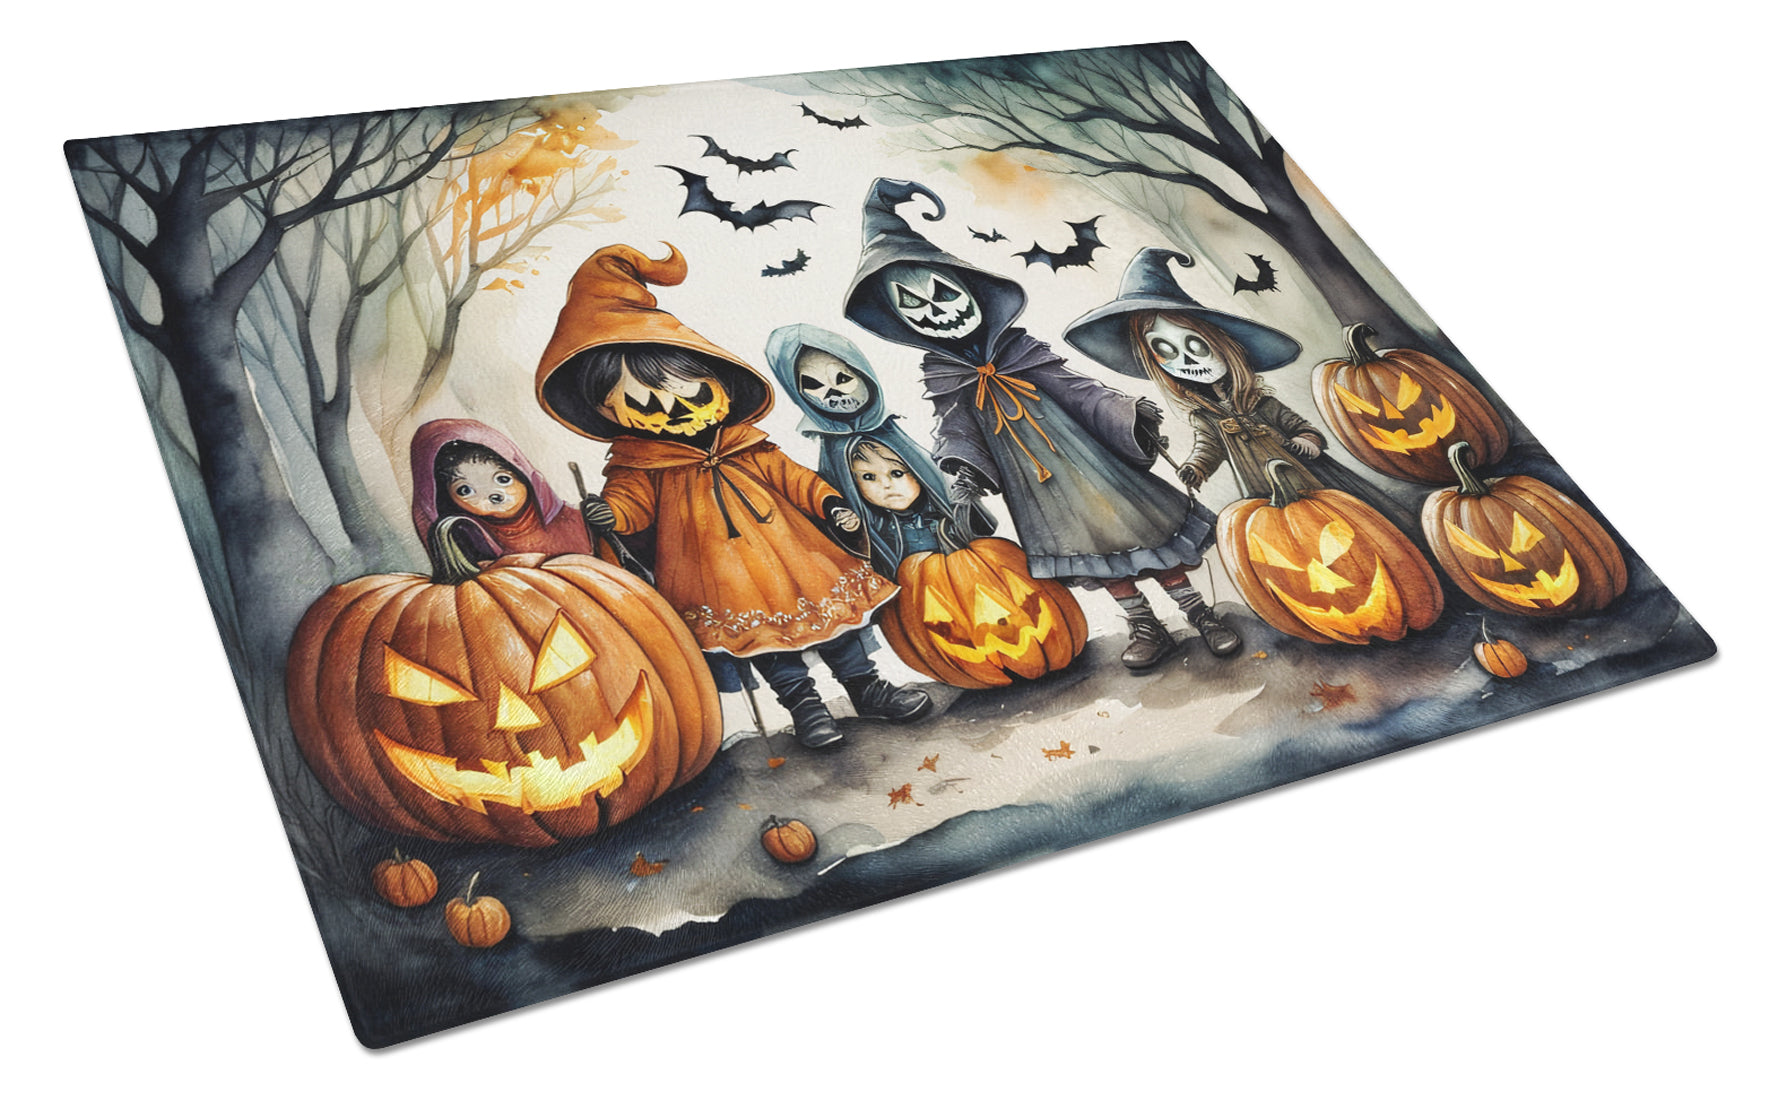 Buy this Trick or Treaters Spooky Halloween Glass Cutting Board Large